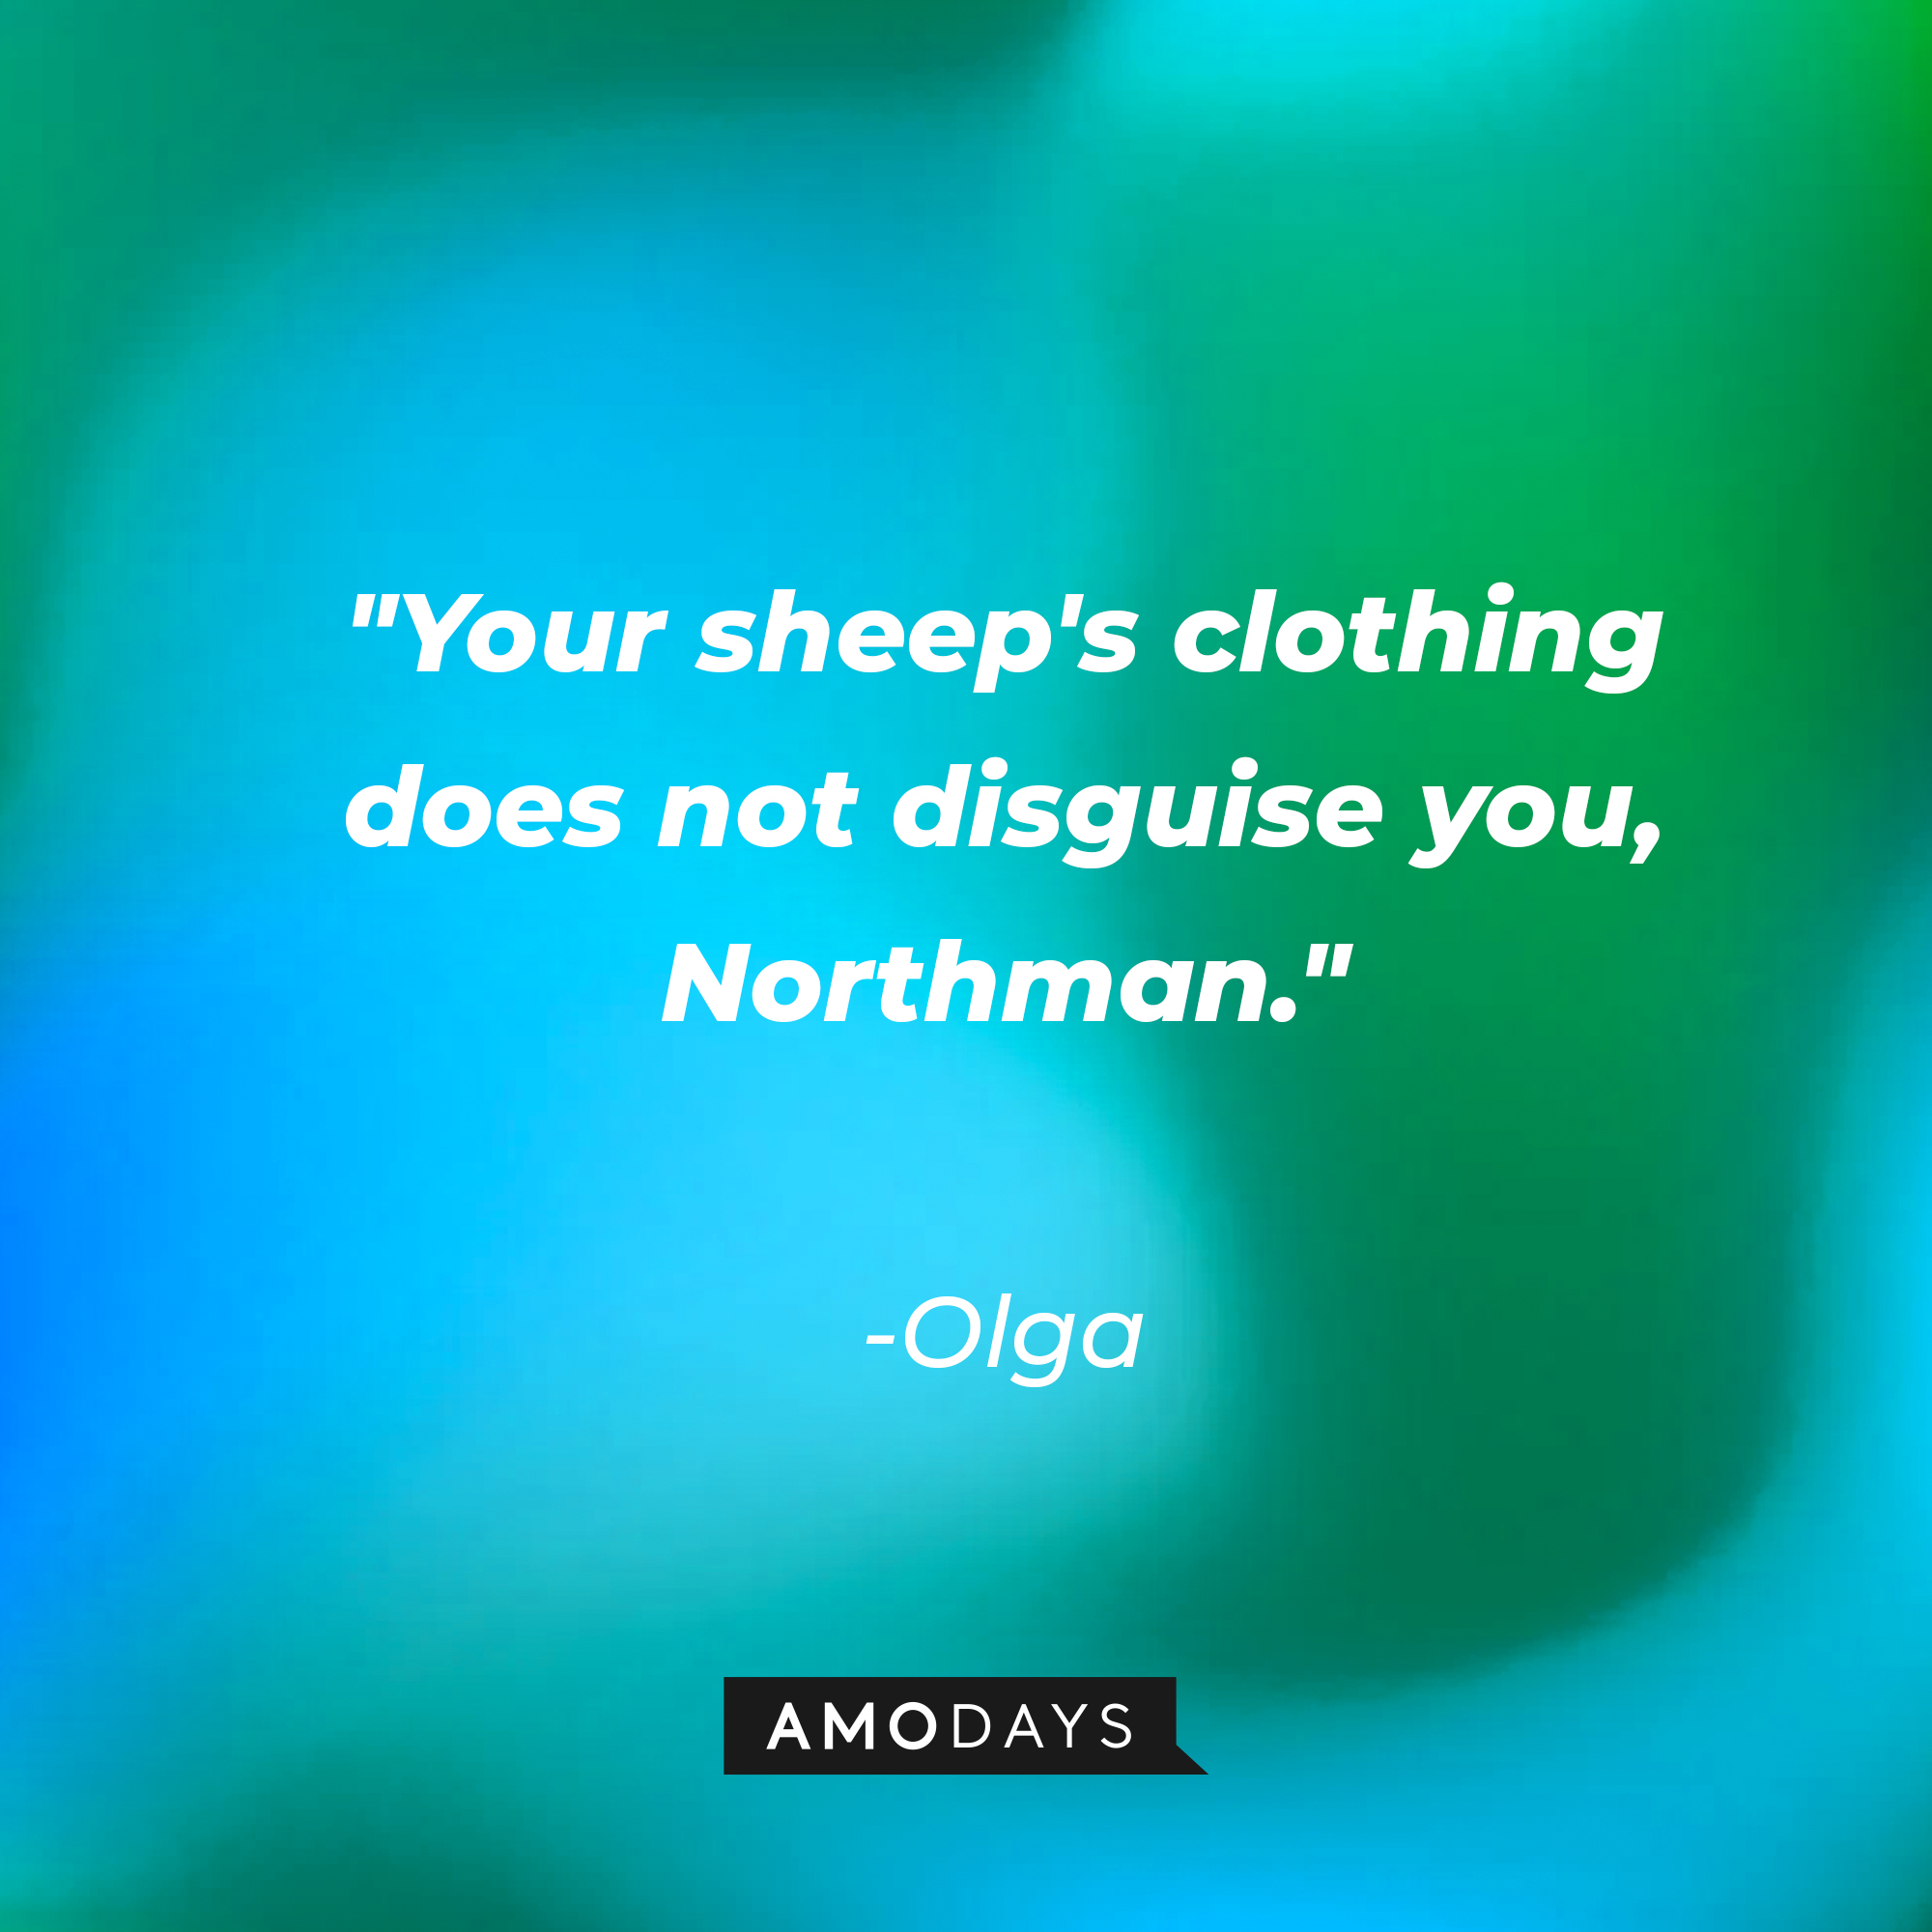 Olga's quote: "Your sheep's clothing does not disguise you, Northman." | Source: AmoDays